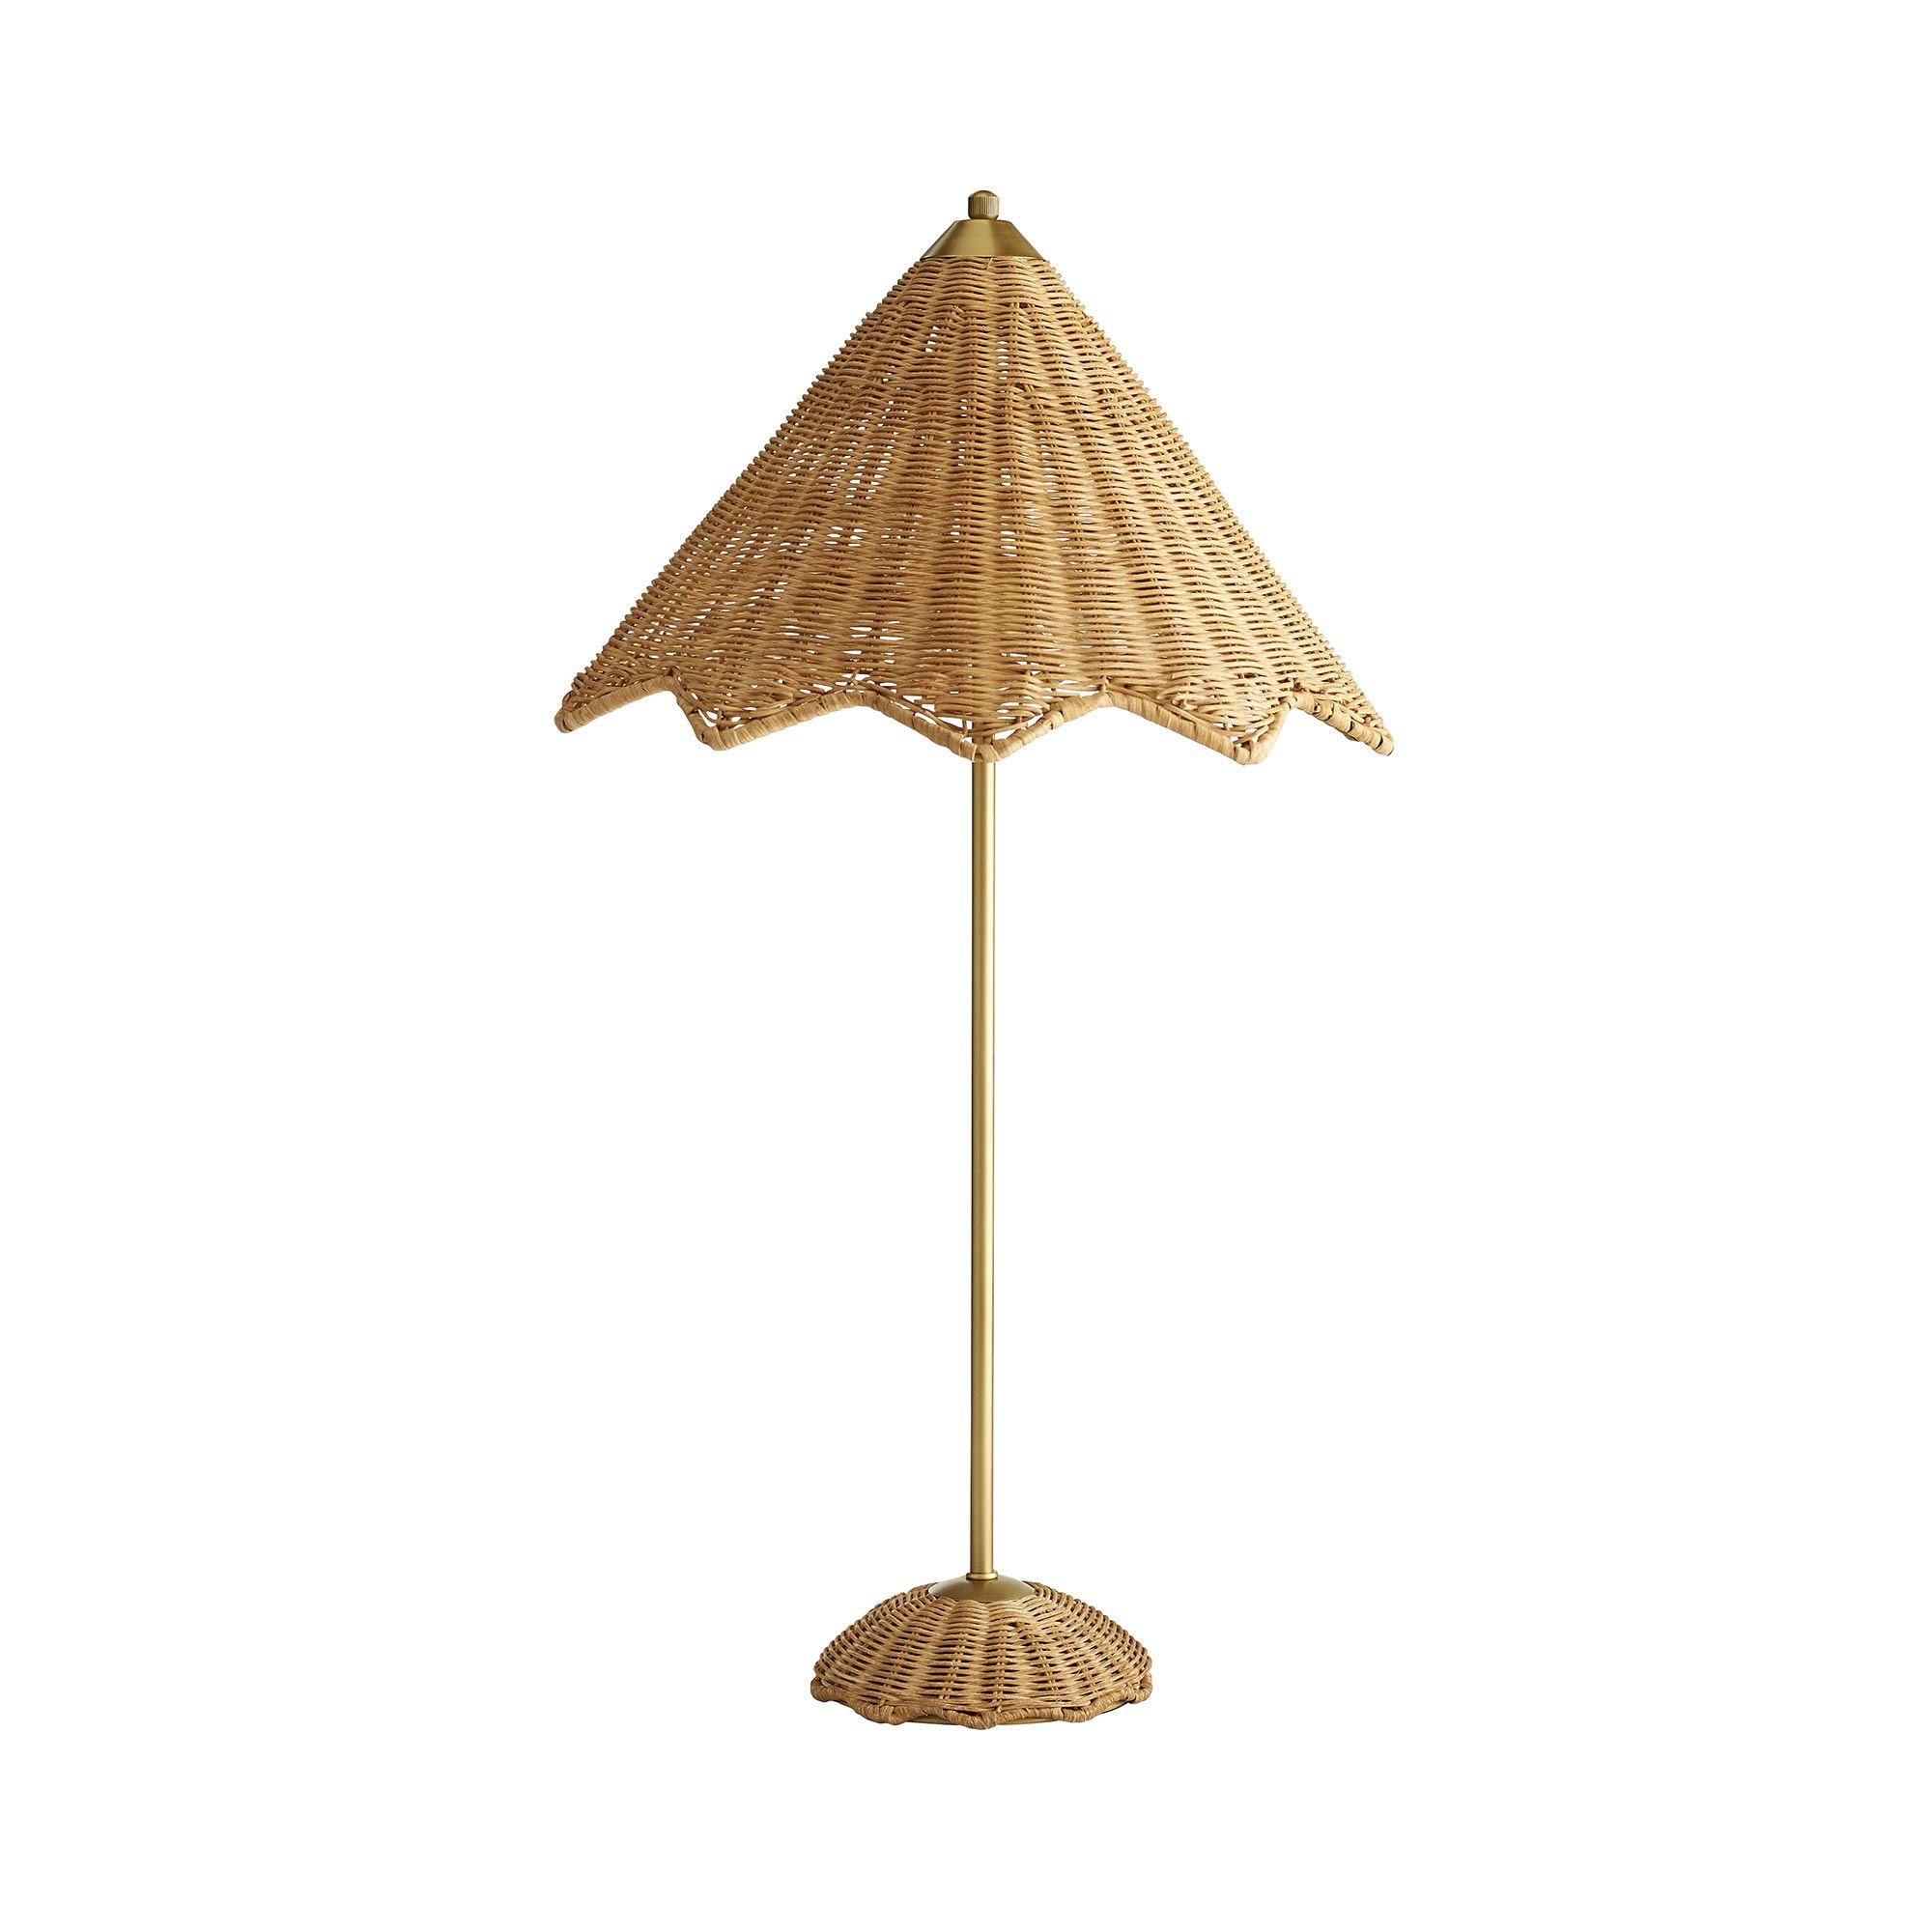 Smeltend Stereotype dwaas DC49018 - Parasol Lamp - Natural Rattan, Antique Brass